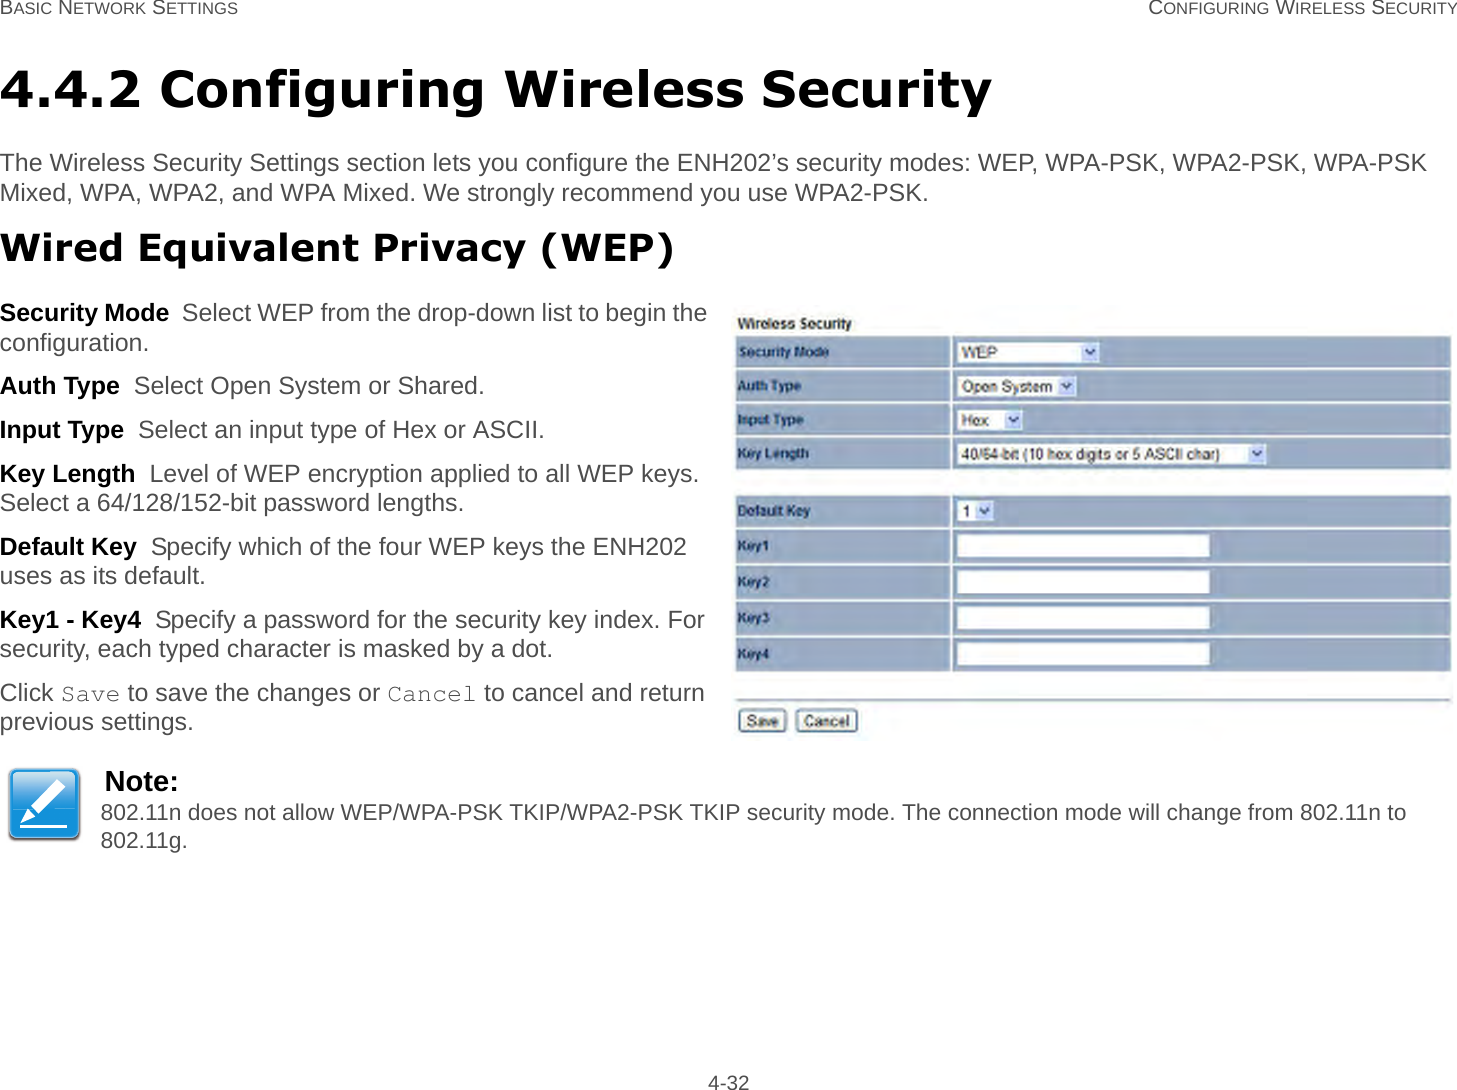 BASIC NETWORK SETTINGS CONFIGURING WIRELESS SECURITY 4-324.4.2 Configuring Wireless SecurityThe Wireless Security Settings section lets you configure the ENH202’s security modes: WEP, WPA-PSK, WPA2-PSK, WPA-PSK Mixed, WPA, WPA2, and WPA Mixed. We strongly recommend you use WPA2-PSK.Wired Equivalent Privacy (WEP)Security Mode  Select WEP from the drop-down list to begin the configuration.Auth Type  Select Open System or Shared.Input Type  Select an input type of Hex or ASCII.Key Length  Level of WEP encryption applied to all WEP keys. Select a 64/128/152-bit password lengths.Default Key  Specify which of the four WEP keys the ENH202 uses as its default.Key1 - Key4  Specify a password for the security key index. For security, each typed character is masked by a dot.Click Save to save the changes or Cancel to cancel and return previous settings.Note:802.11n does not allow WEP/WPA-PSK TKIP/WPA2-PSK TKIP security mode. The connection mode will change from 802.11n to 802.11g.